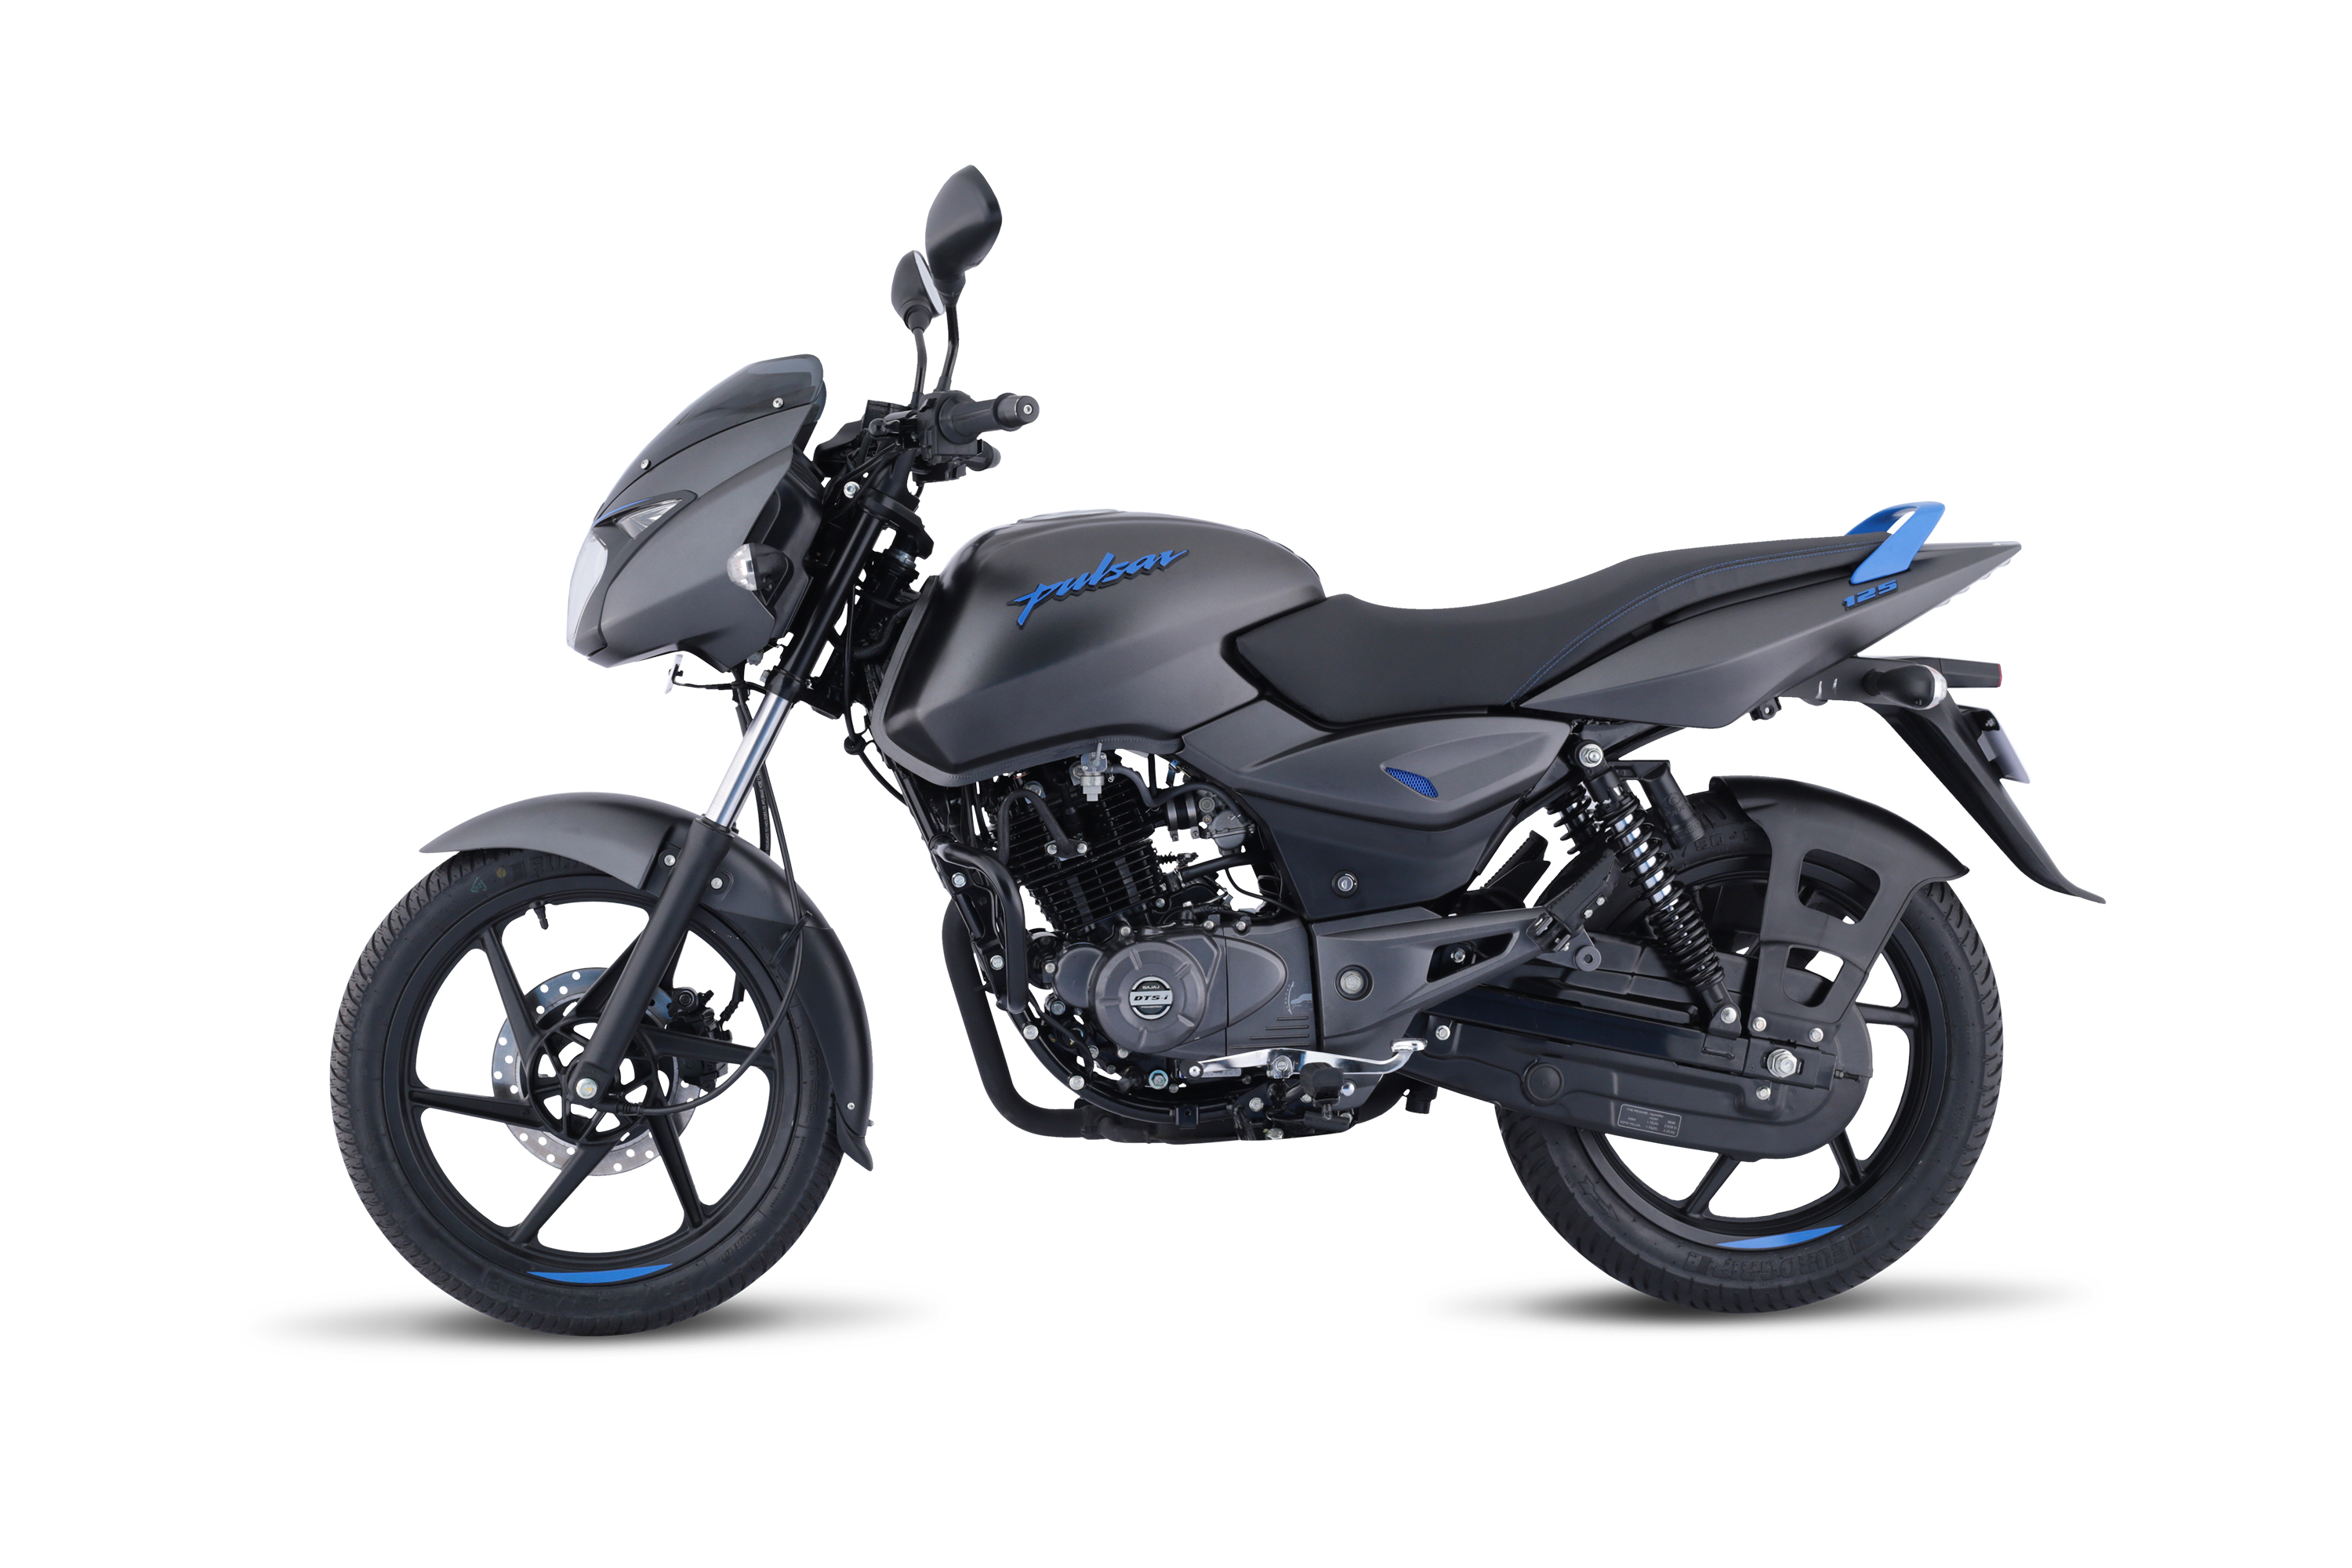 Bajaj Pulsar 125 Neon launched: Equipped with class leading